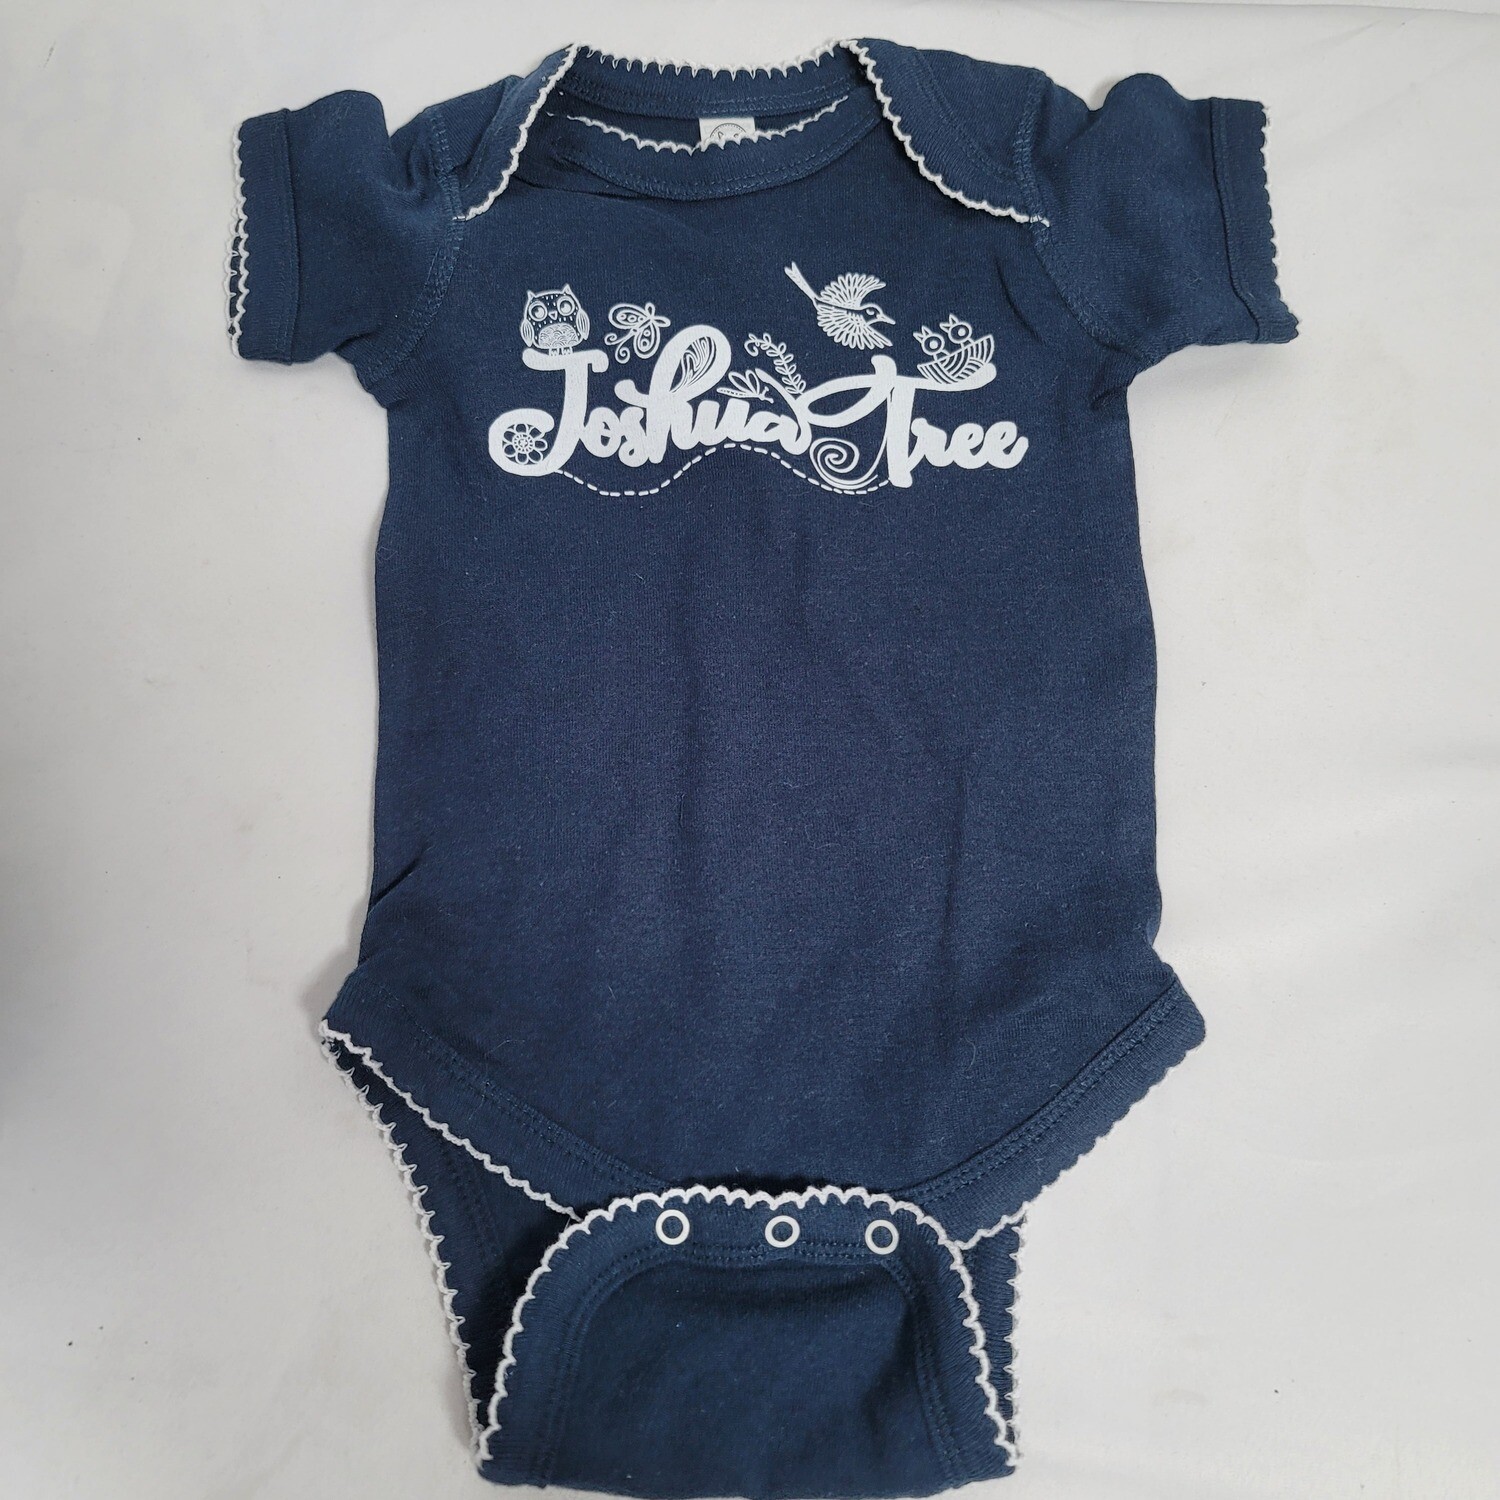 New Baby One Suit Romper Navy Blue